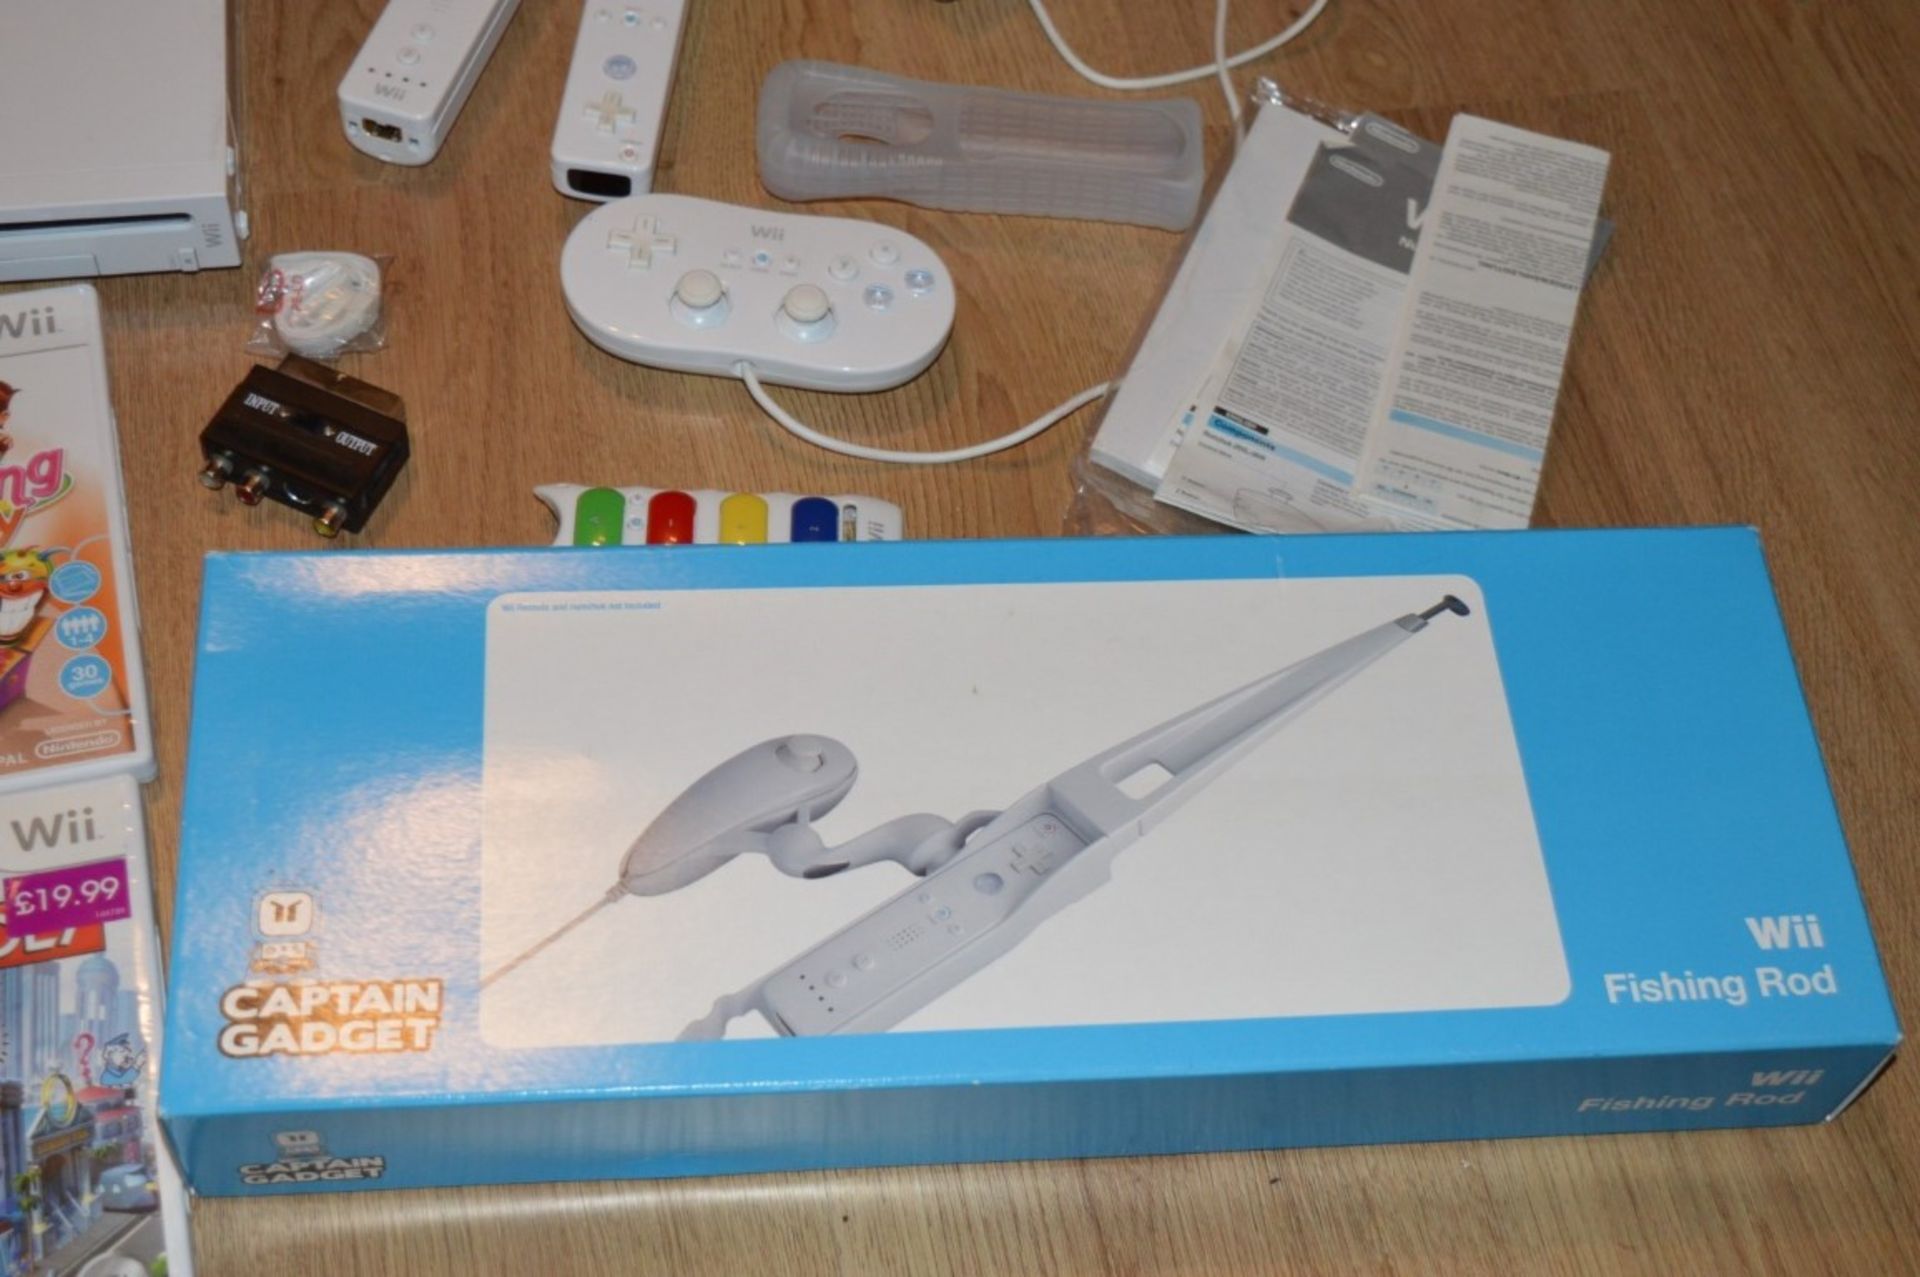 1 x Nintendo Wii Games Console With Wii Fit Board, Various Controllers, Accessories, Fishing Rods - Image 8 of 8